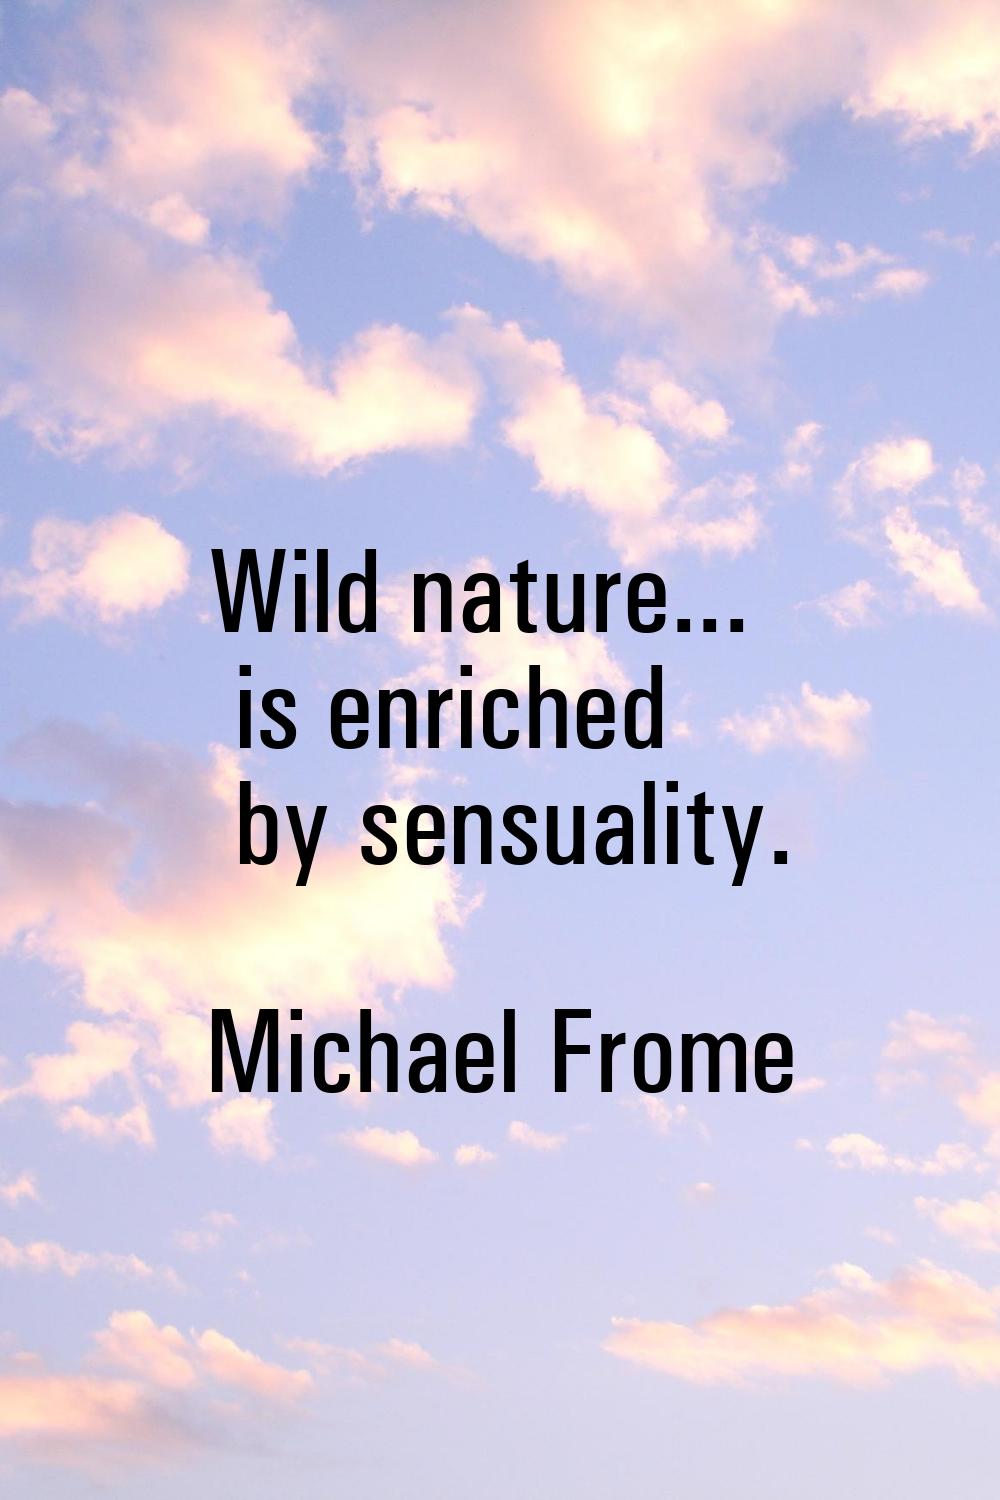 Wild nature... is enriched by sensuality.